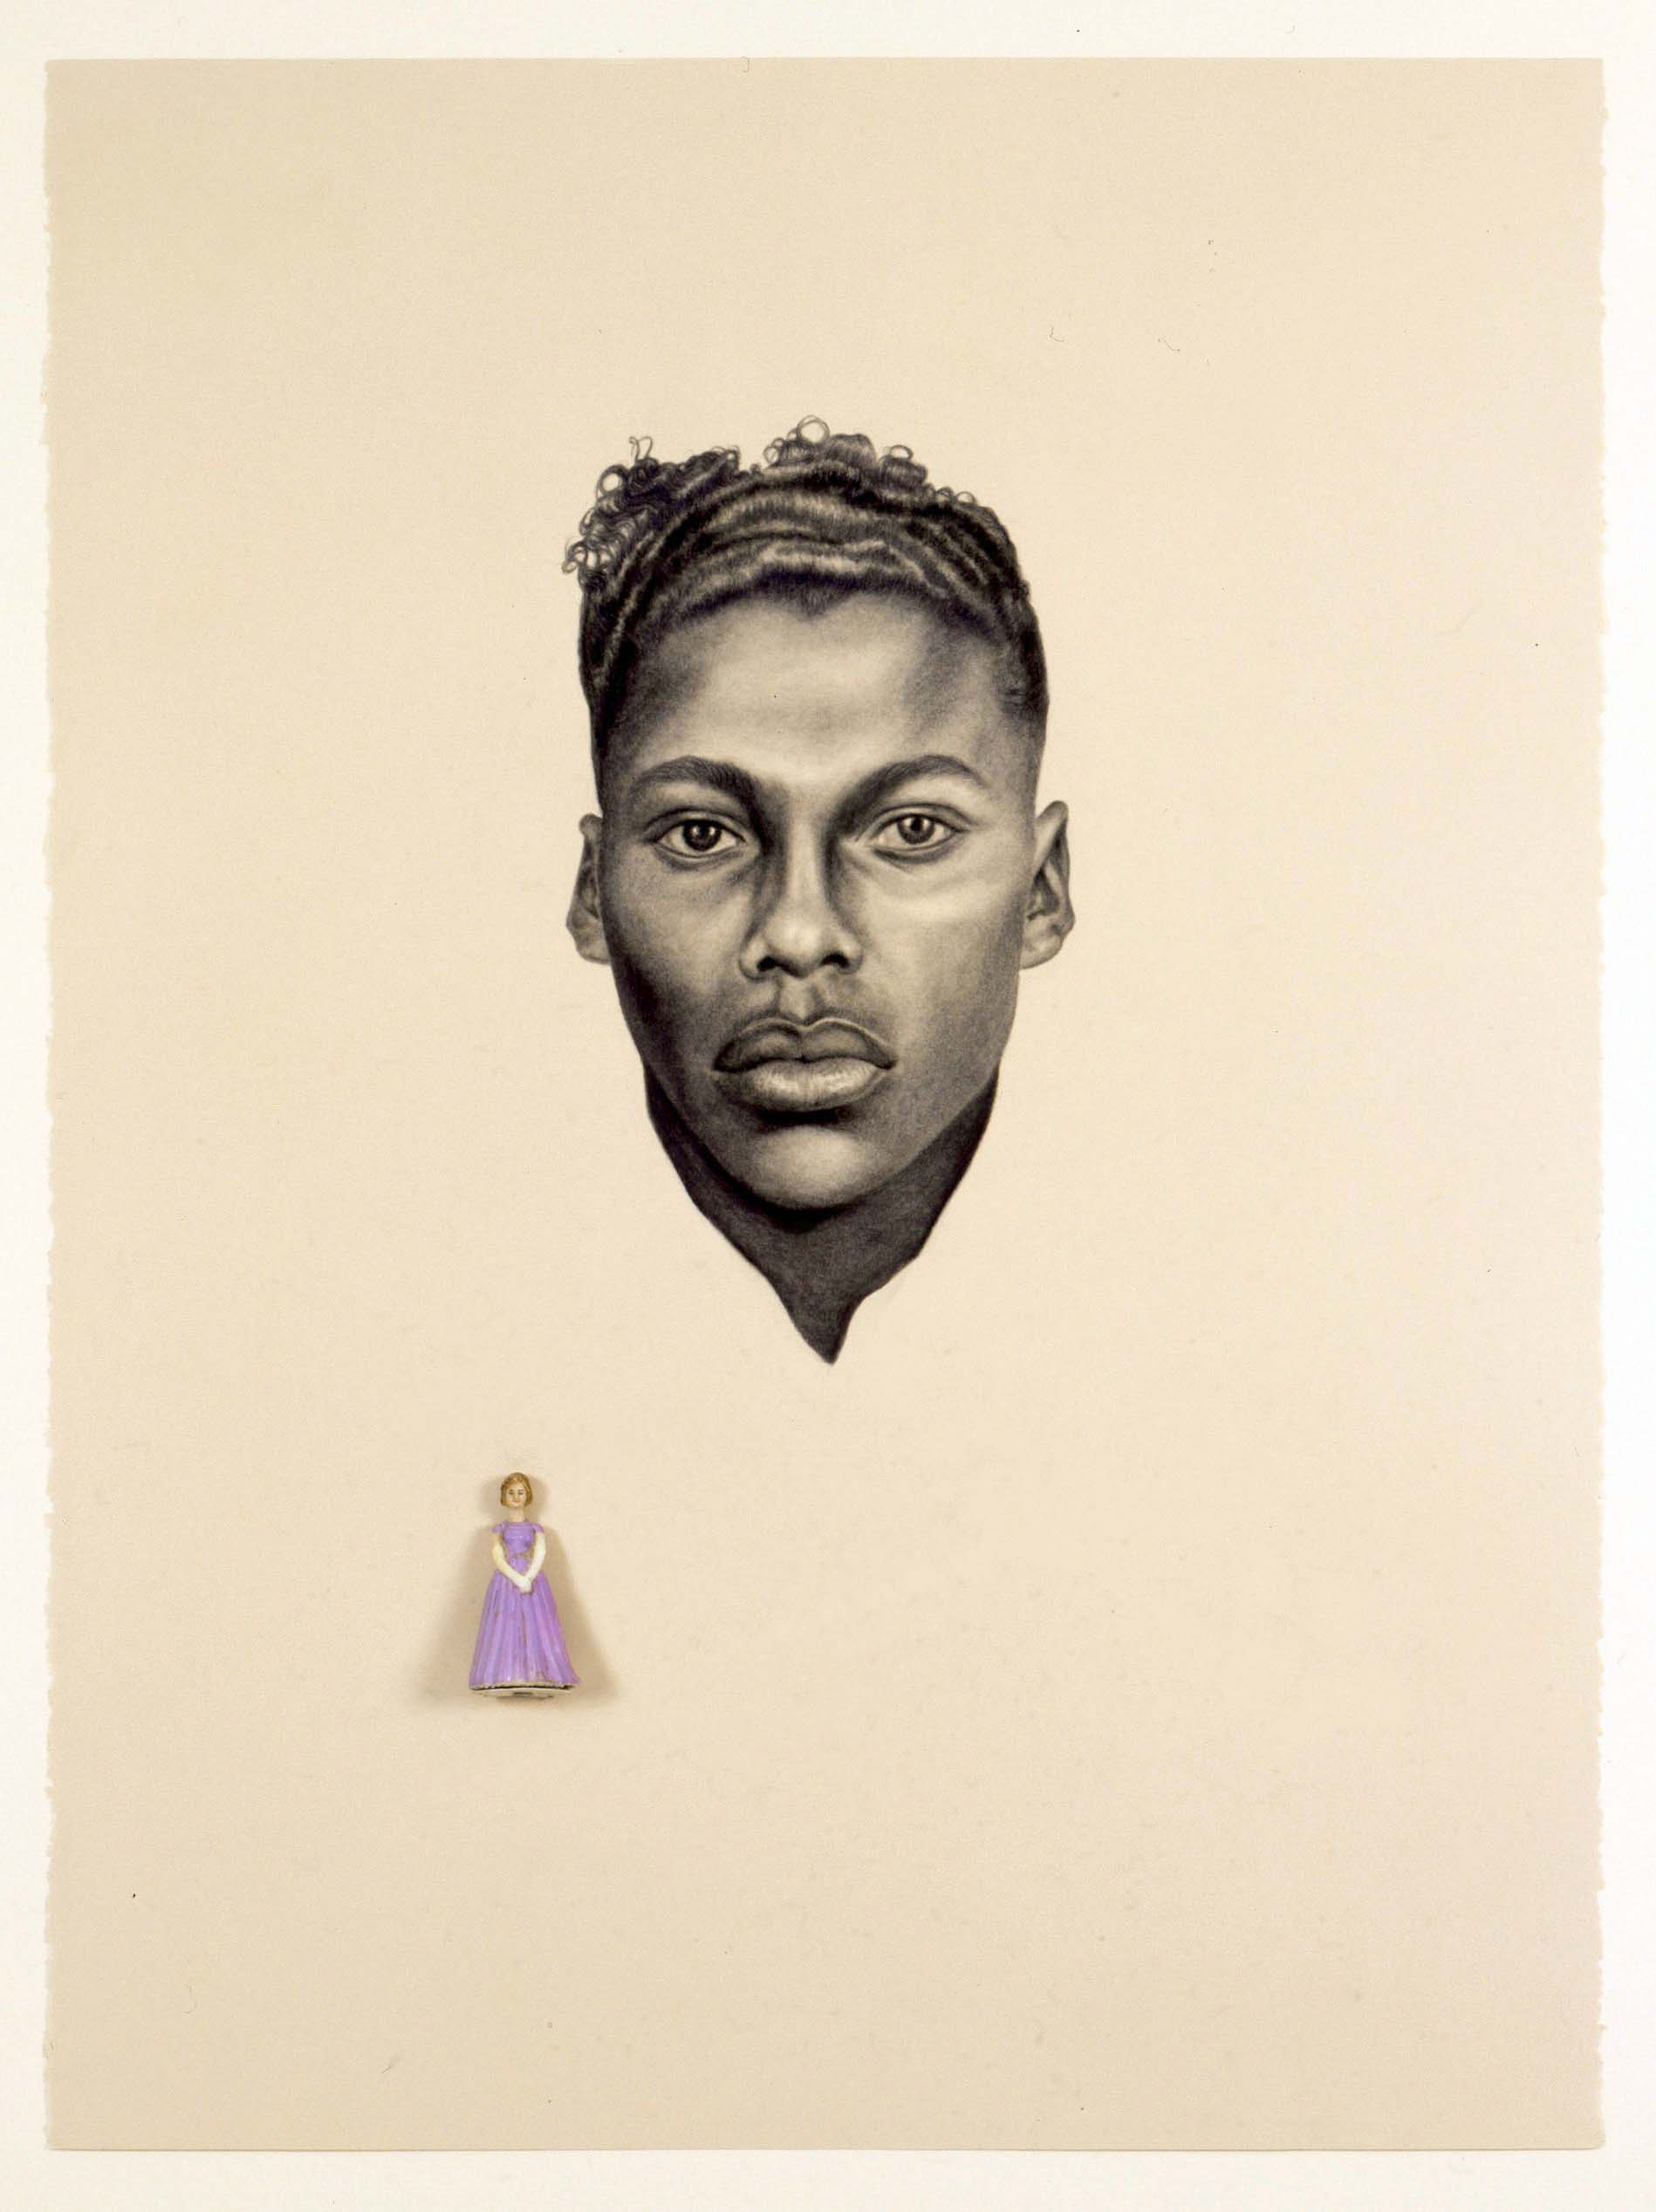 Disembodied head of a man floating in a cream white liminal space, to the left of his head floats a  small doll in a purple dress.